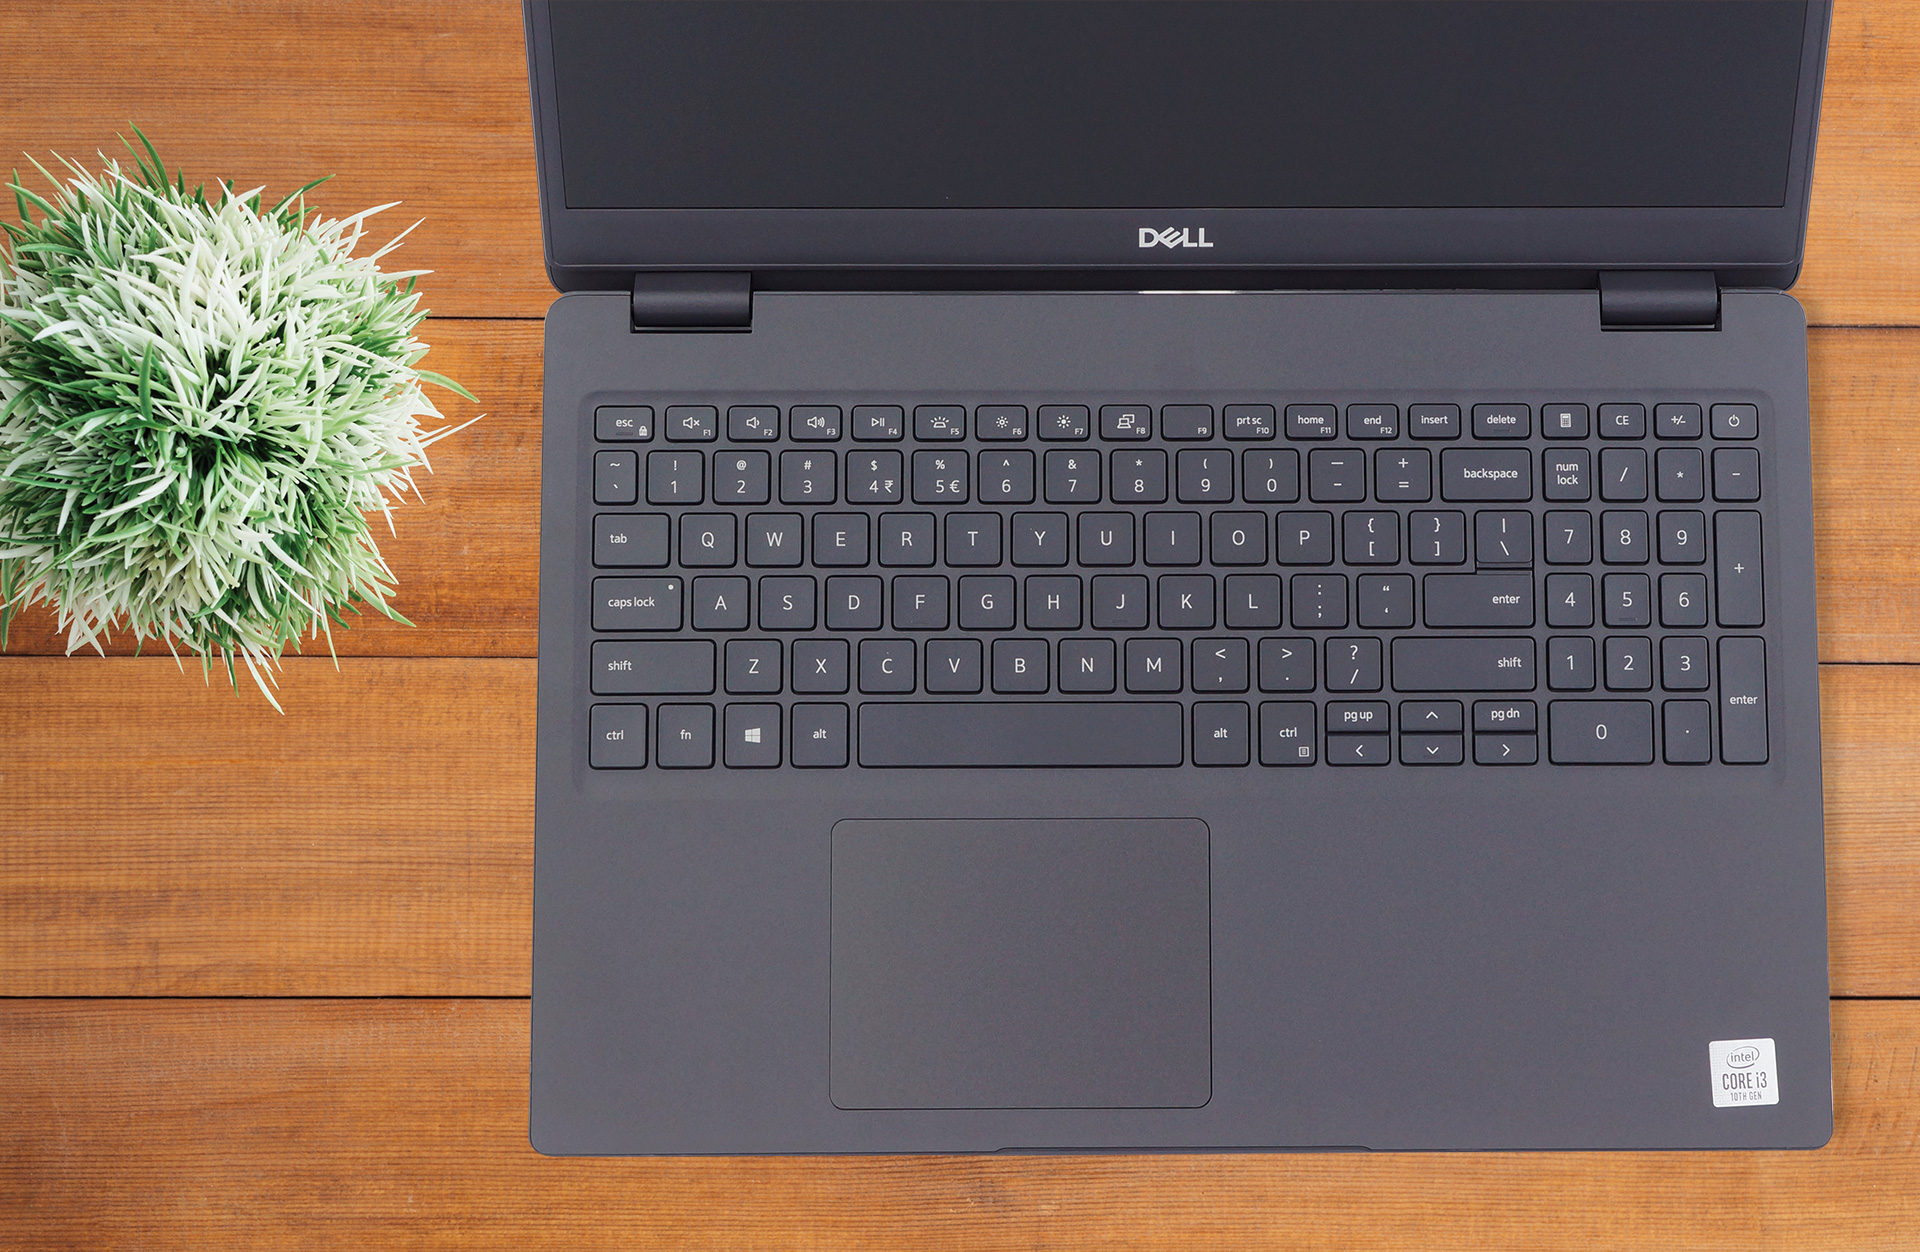 Dell Latitude 15 3510 review - a business notebook dressed in plastic |  